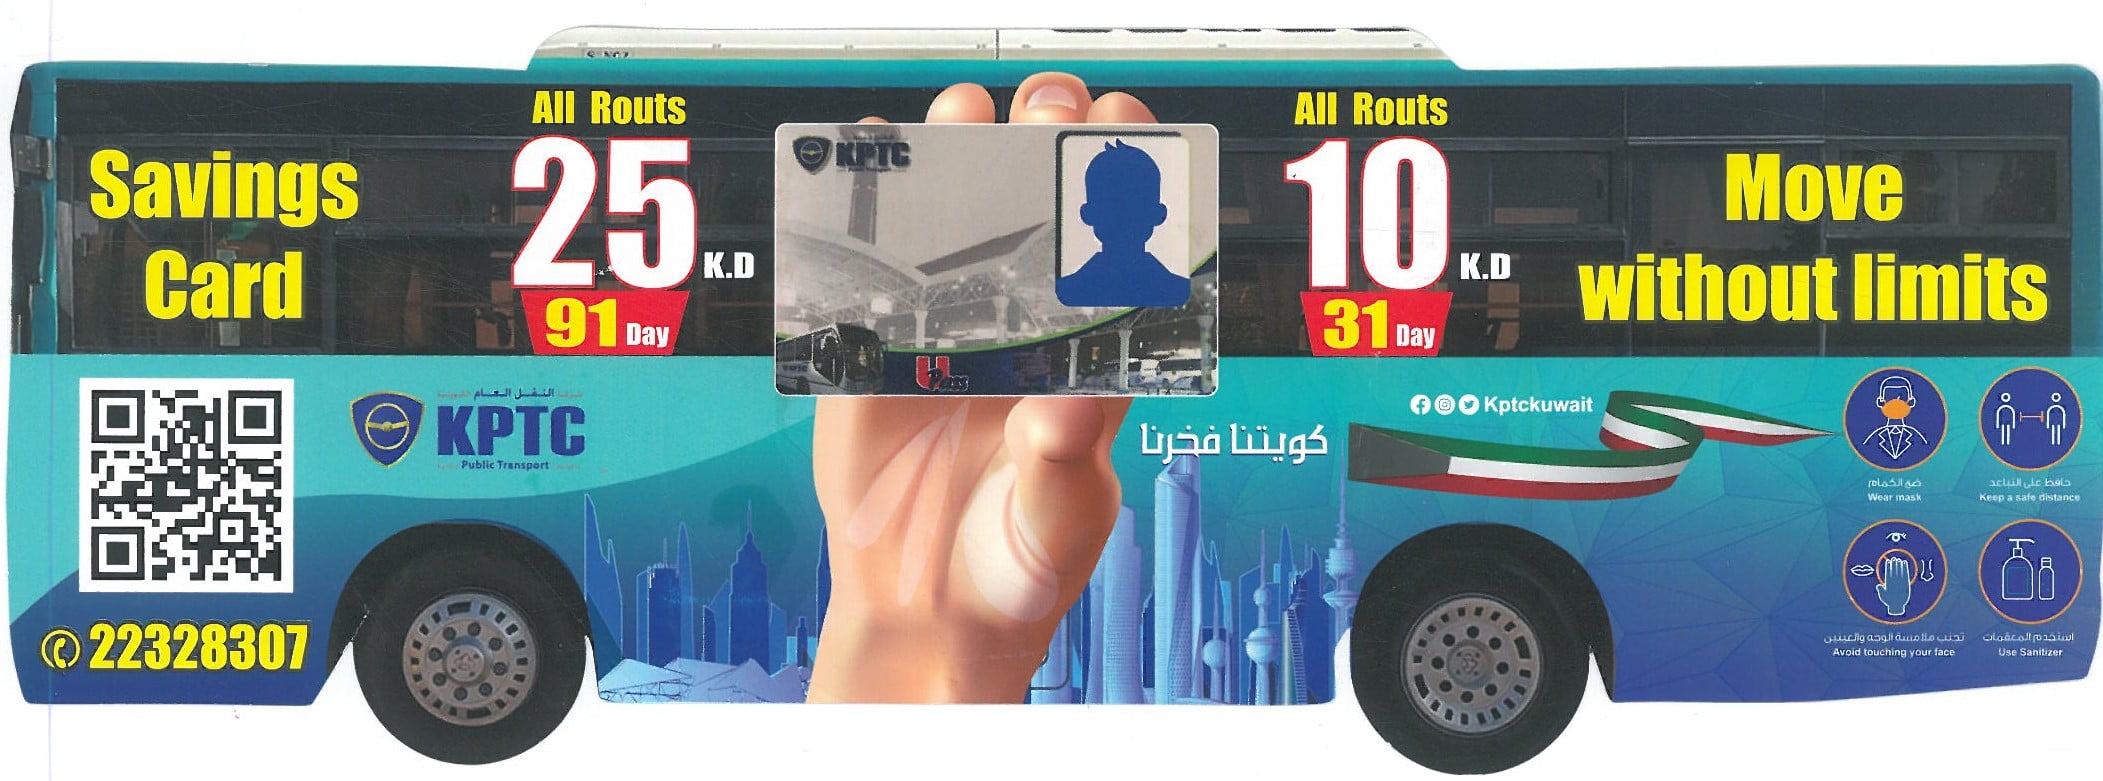 KPTC Bus Pass Offer for All Routes, iiQ8, Buspass Promotions 1